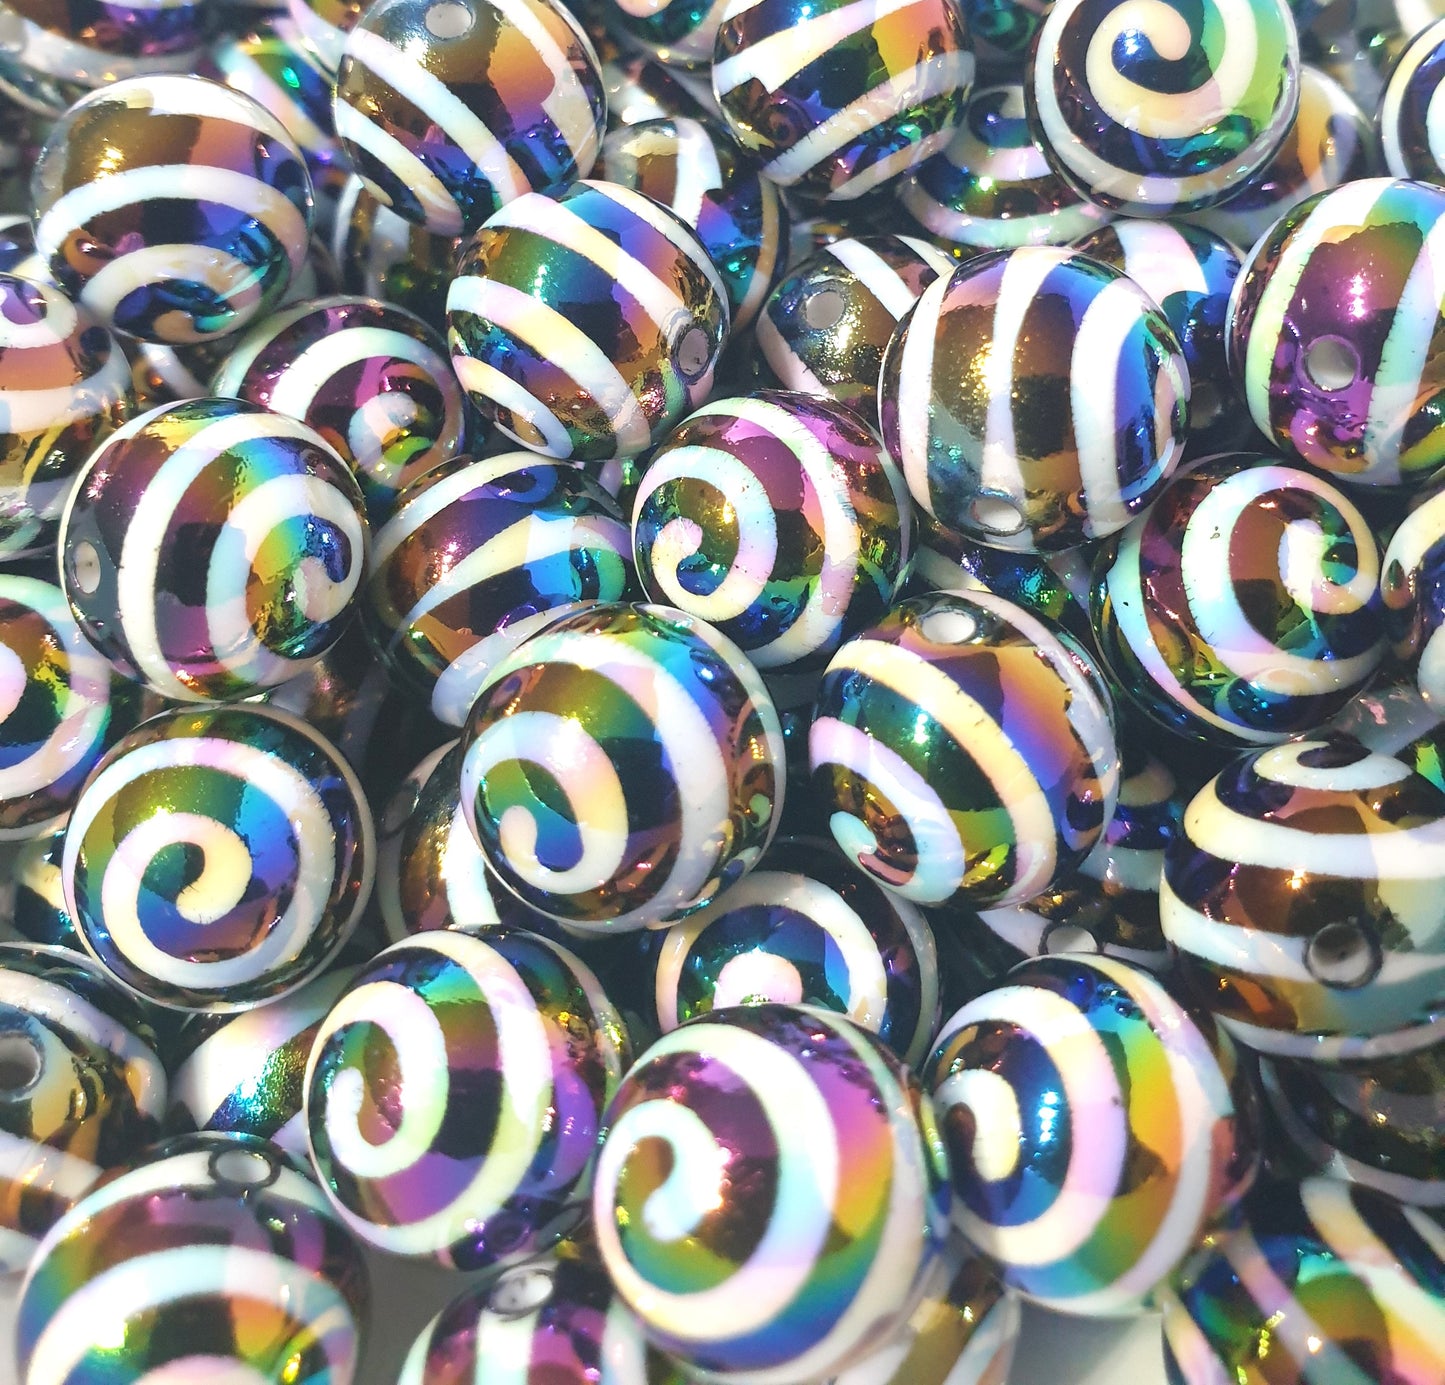 Round 16mm Black and White Swirl beads with UV rainbow finish. Ideal for jewellery and beadable blanks.